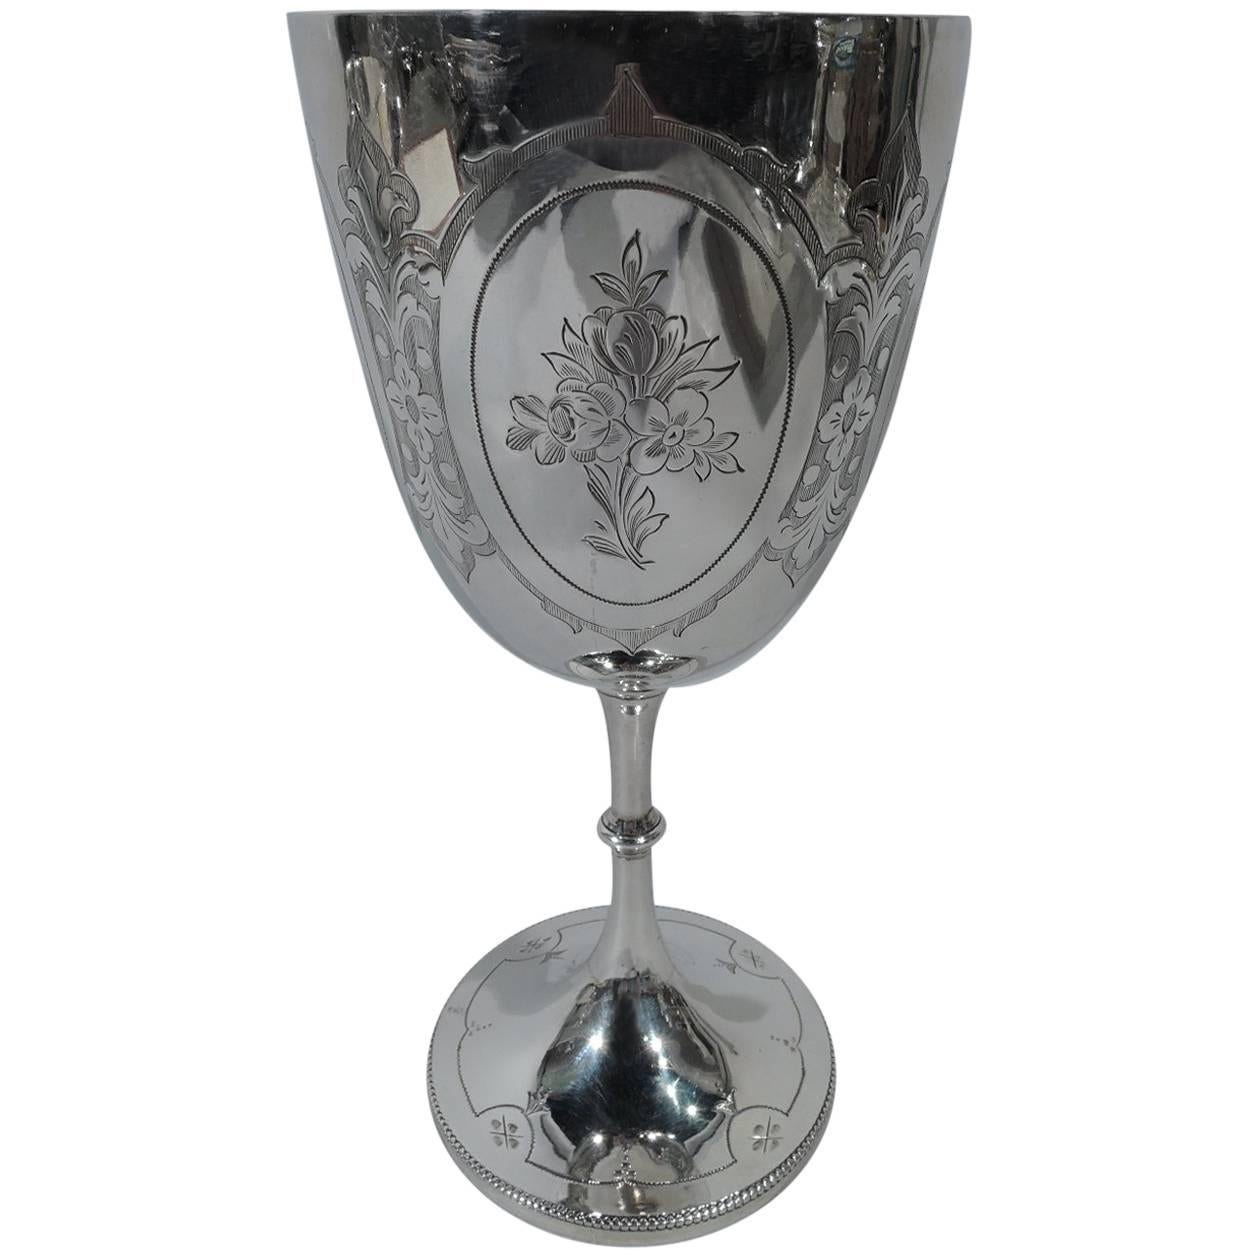 Antique English Sterling Silver Goblet with Flowers